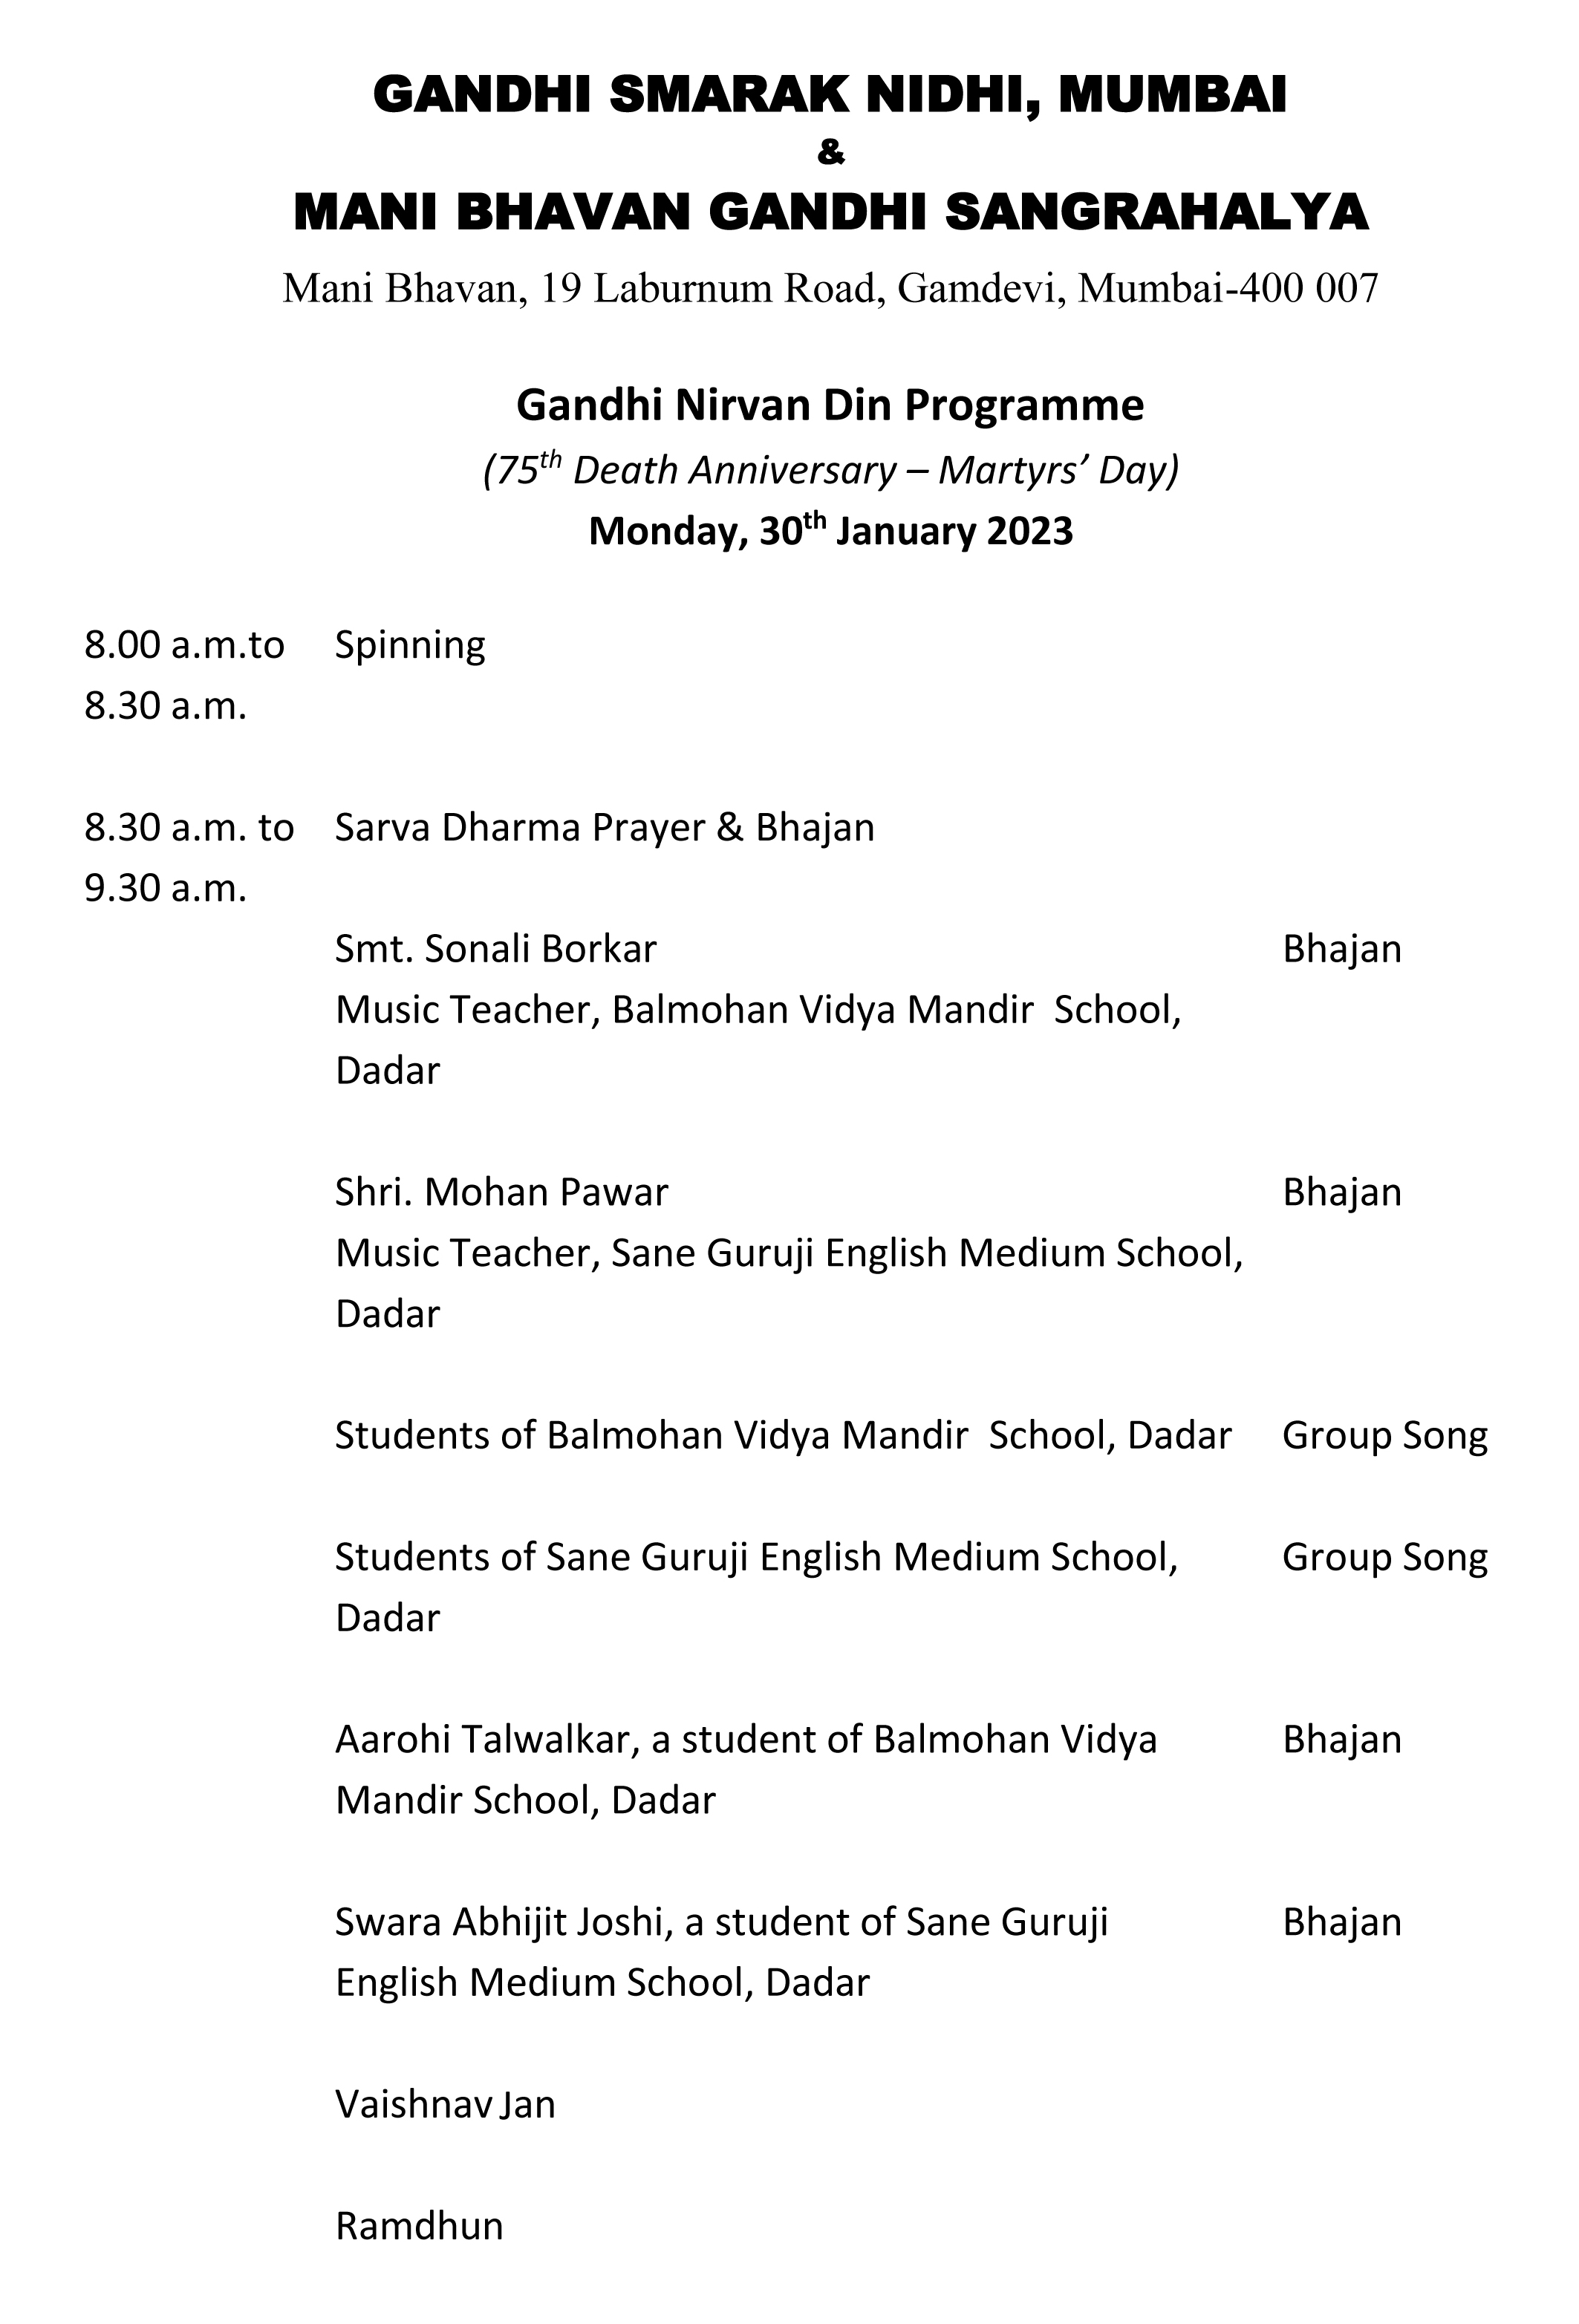 Invitation: Gandhi Nirvan Din - Martyrs' Day programme on the occasion of the 75th Death Anniversary of Mahatma Gandhi on 30th January 2023.